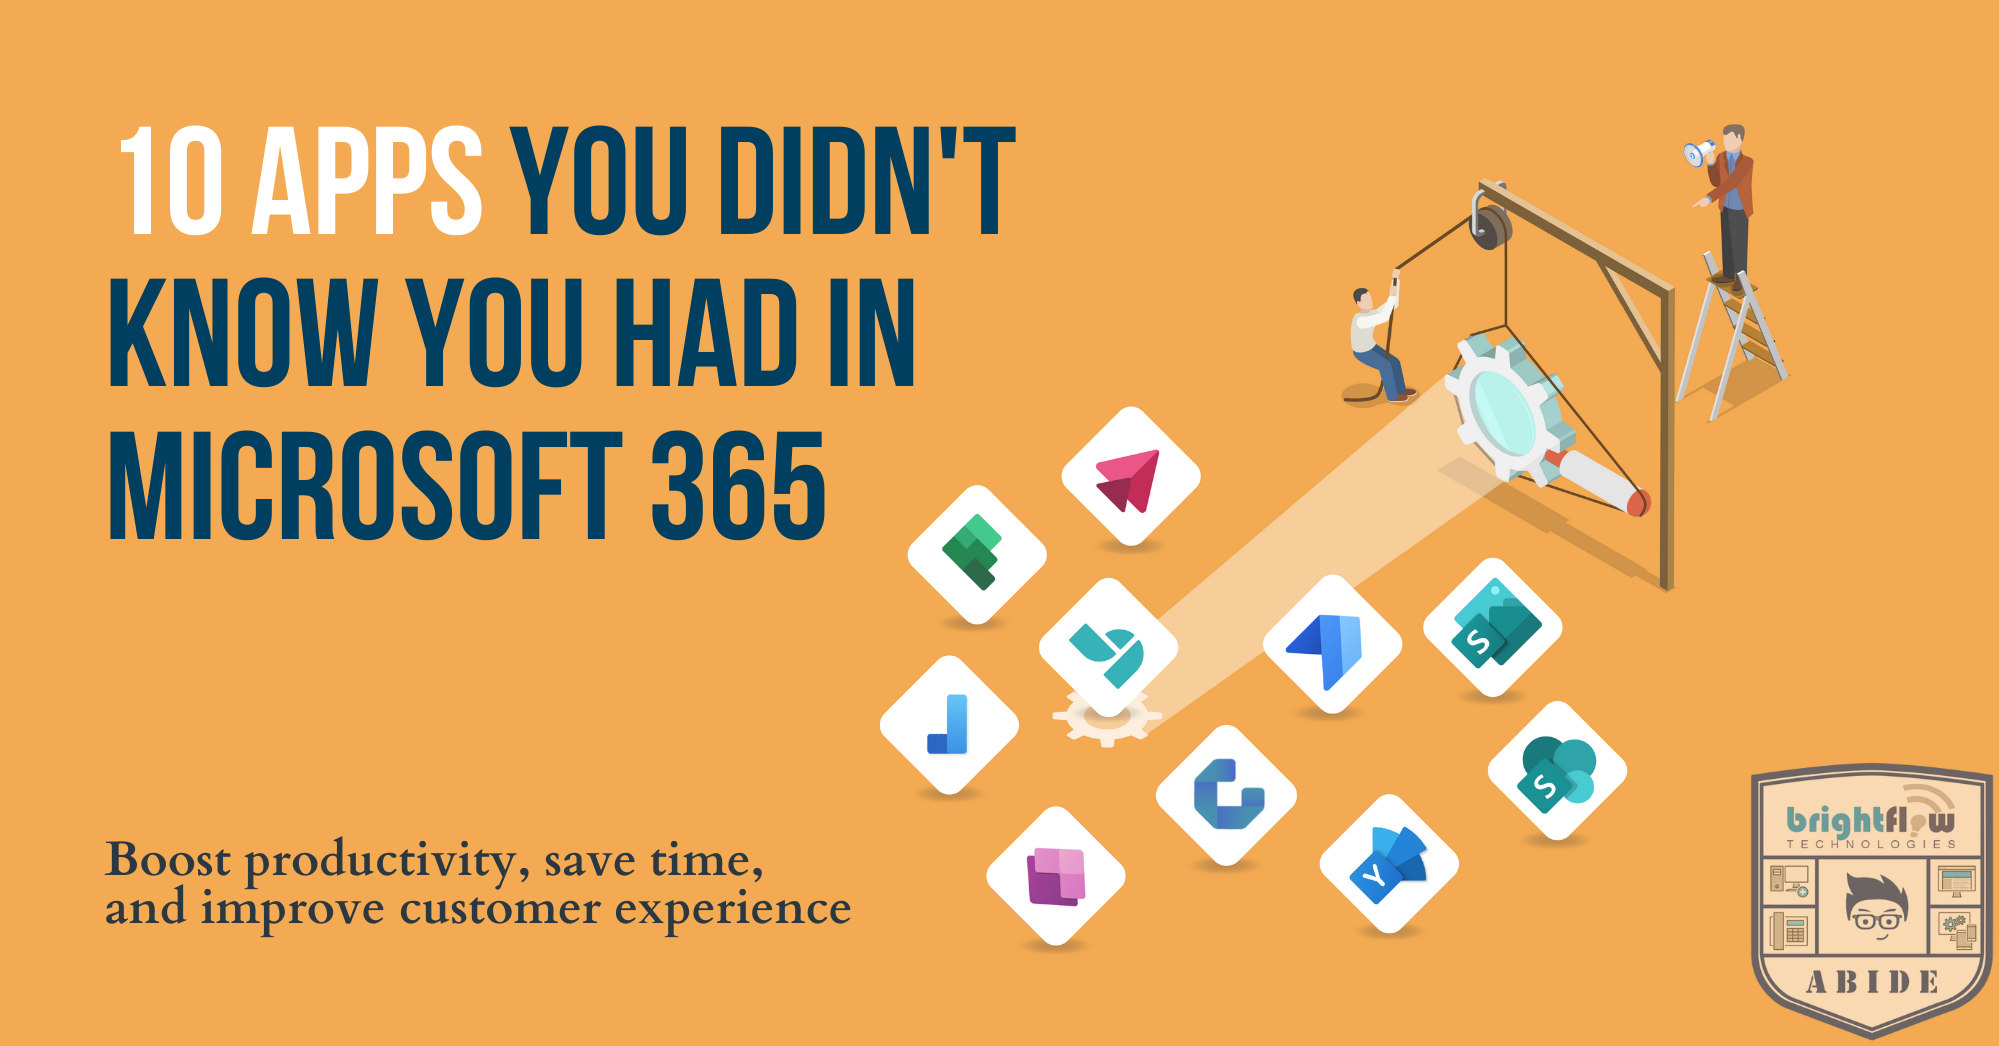 10 Secret Microsoft 365 Apps You Didn’t Know You Had that Saves Time & Improves Efficiency